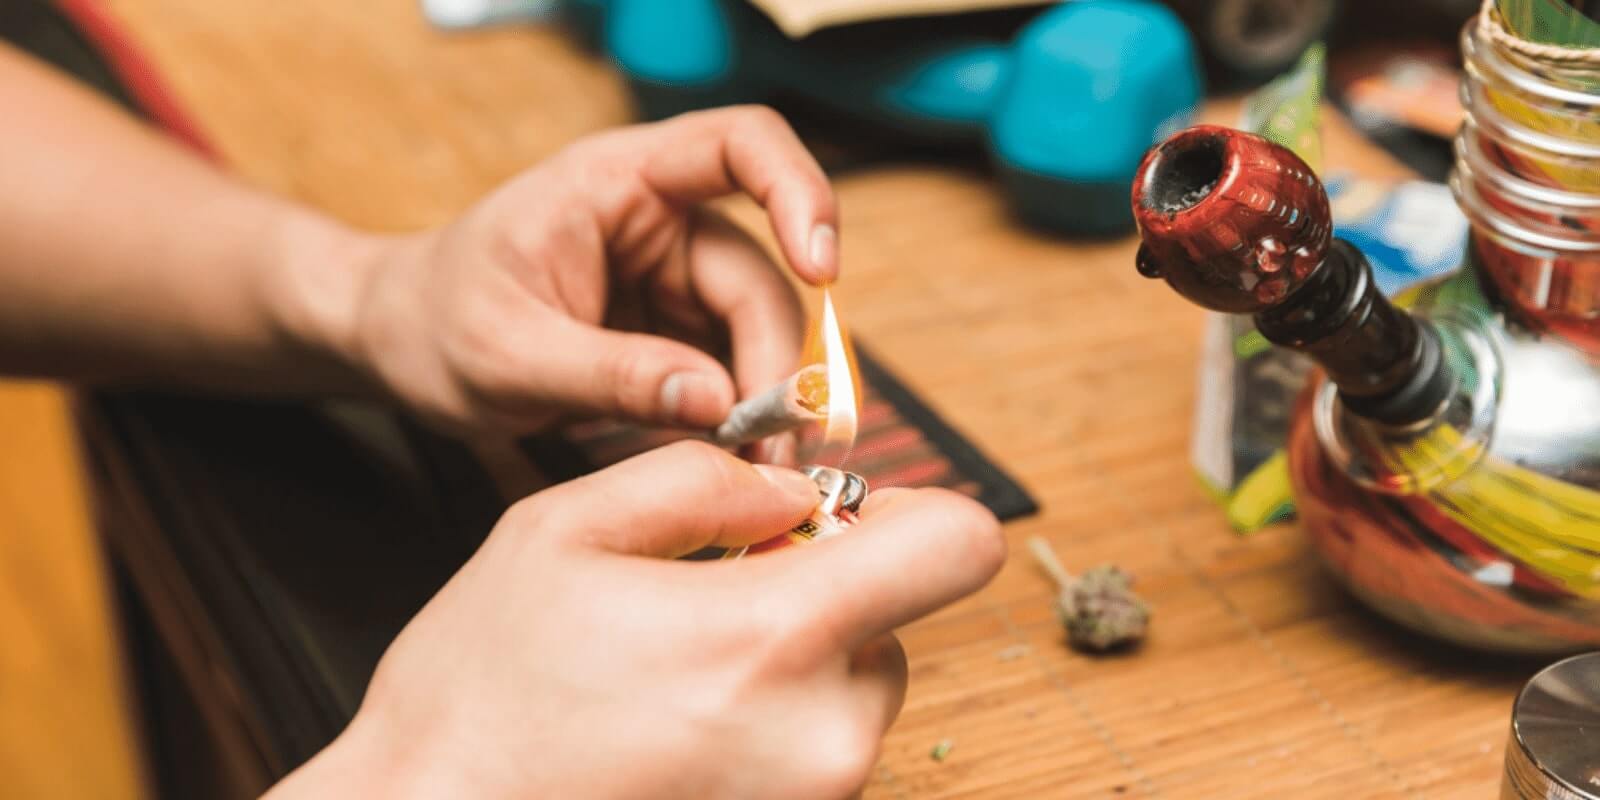 Somone lighting up a joint